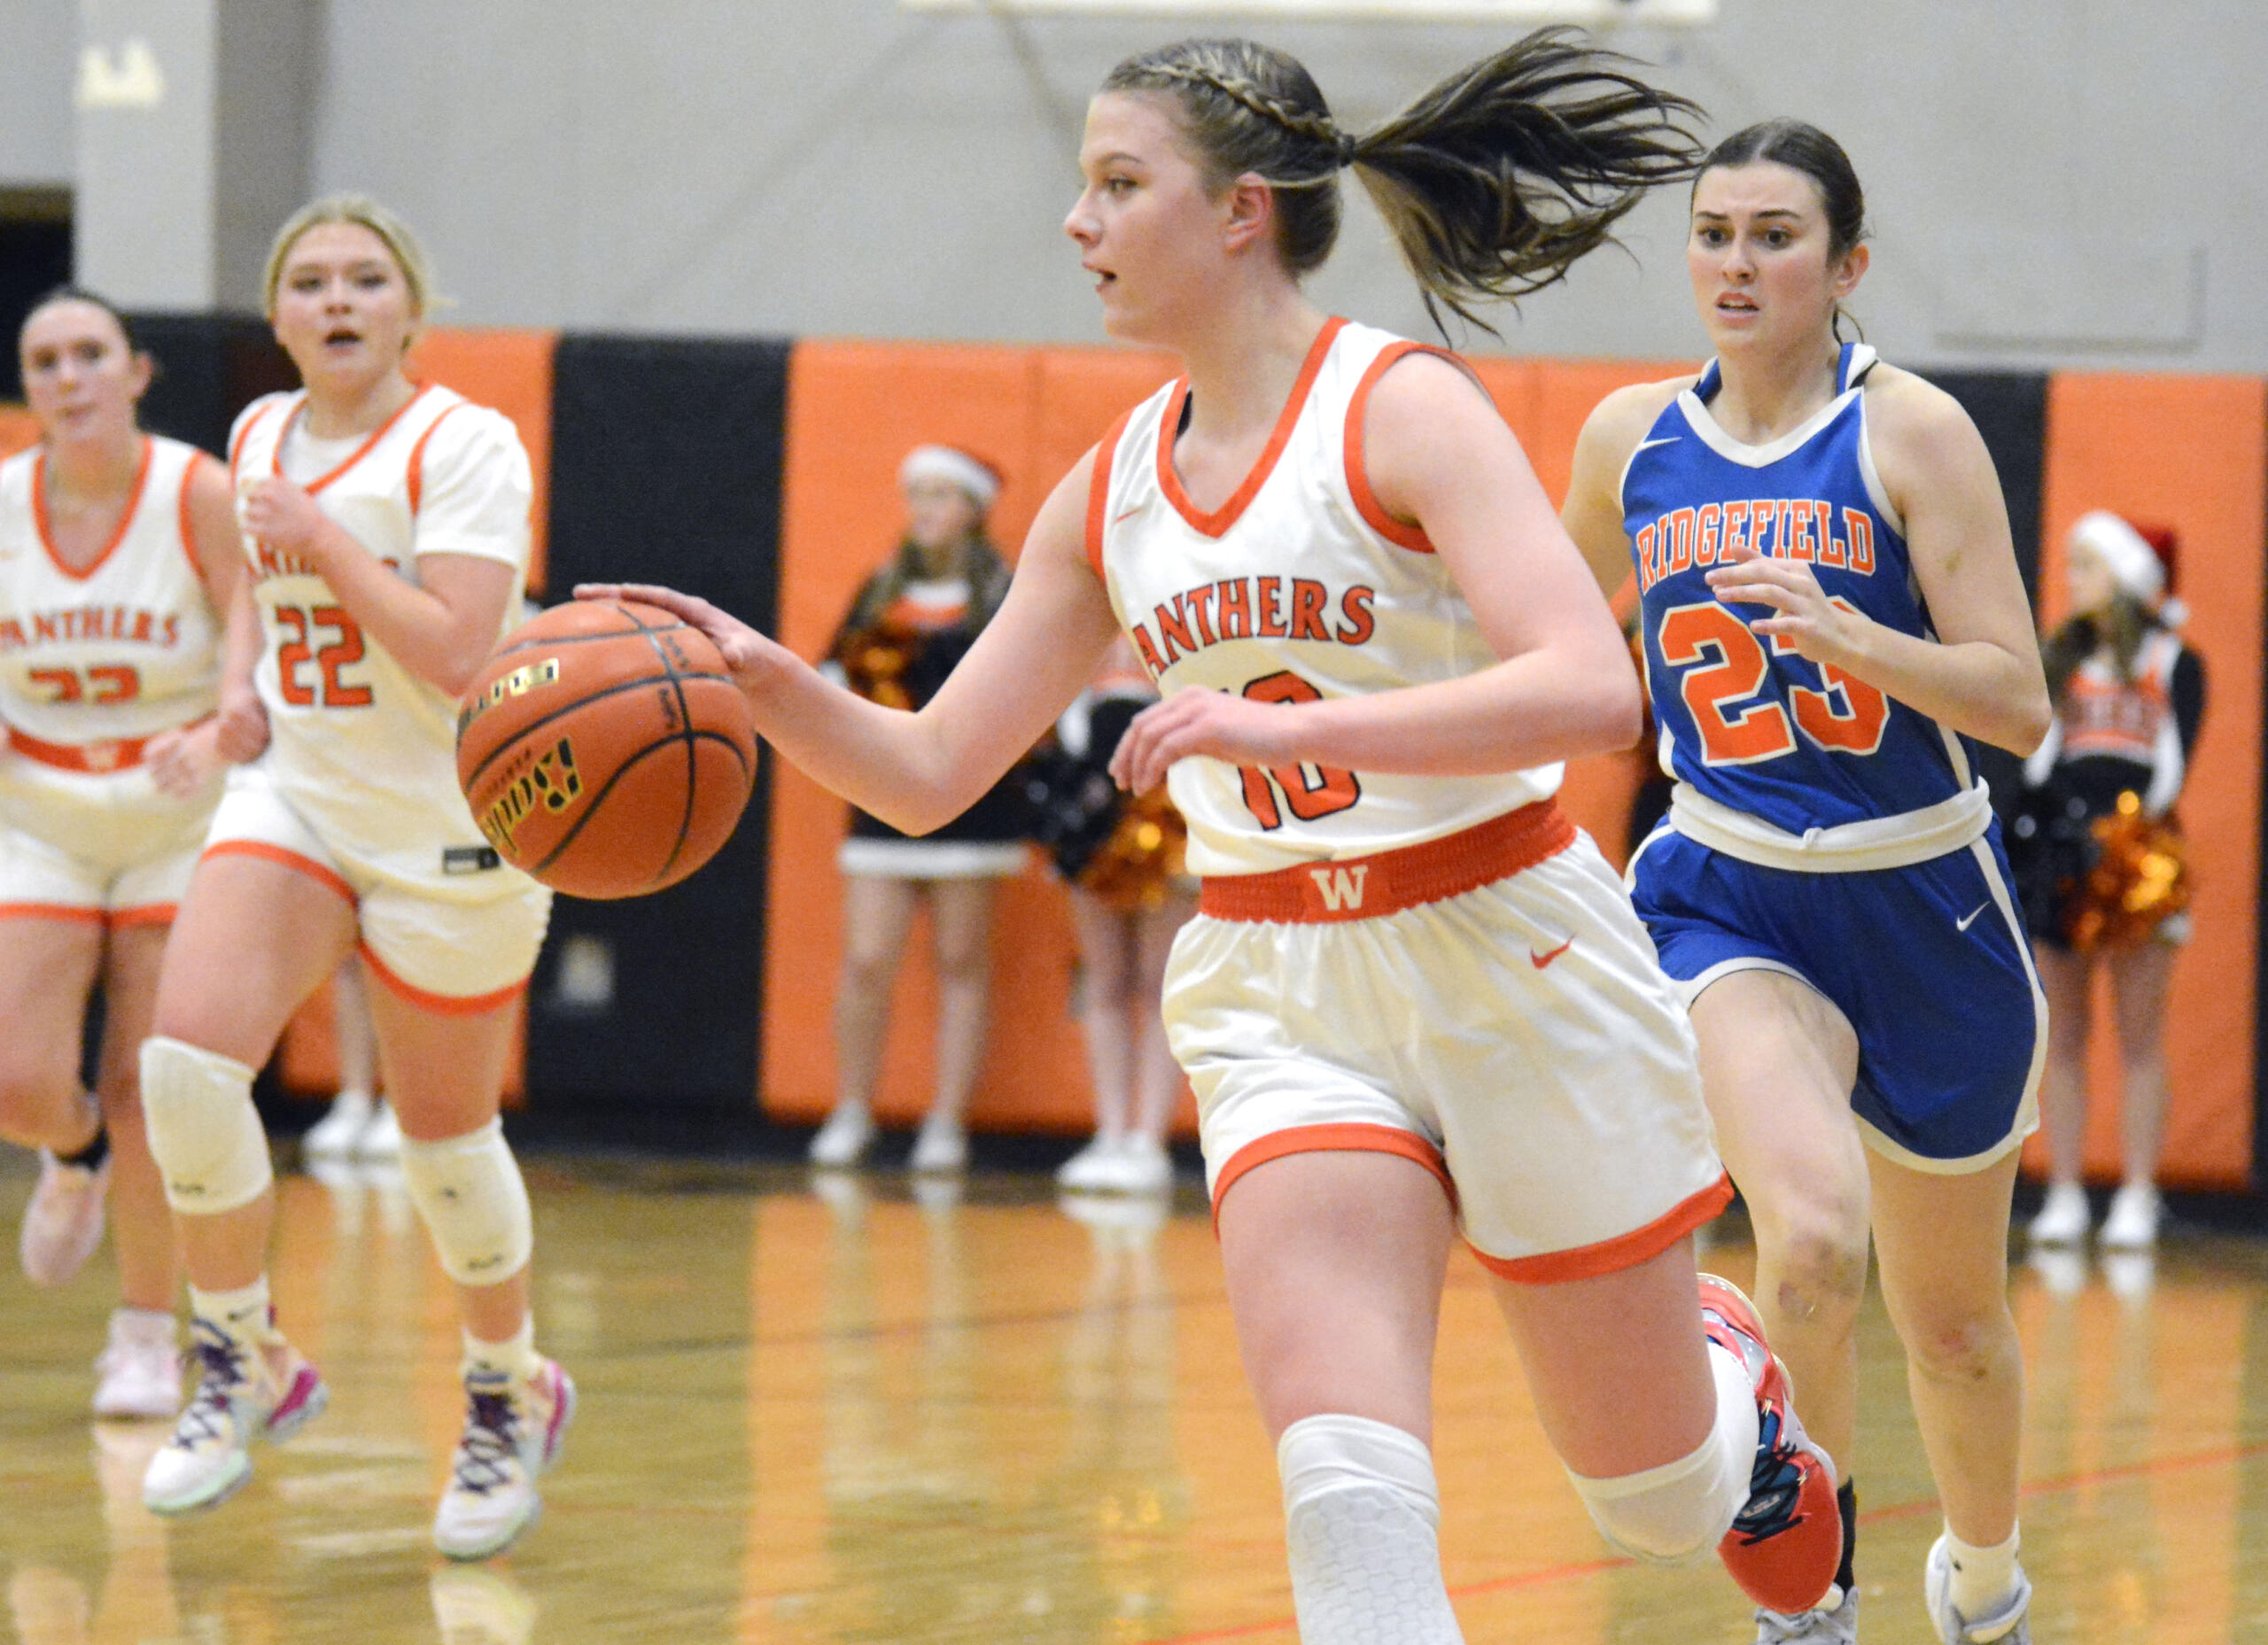 Washougal’s Isabella Albaugh (10) looks to push the pace in transition during a 2A GSHL girls basketball game against Ridgefield on Wednesday, Dec. 14, 2022, at Washougal High School.